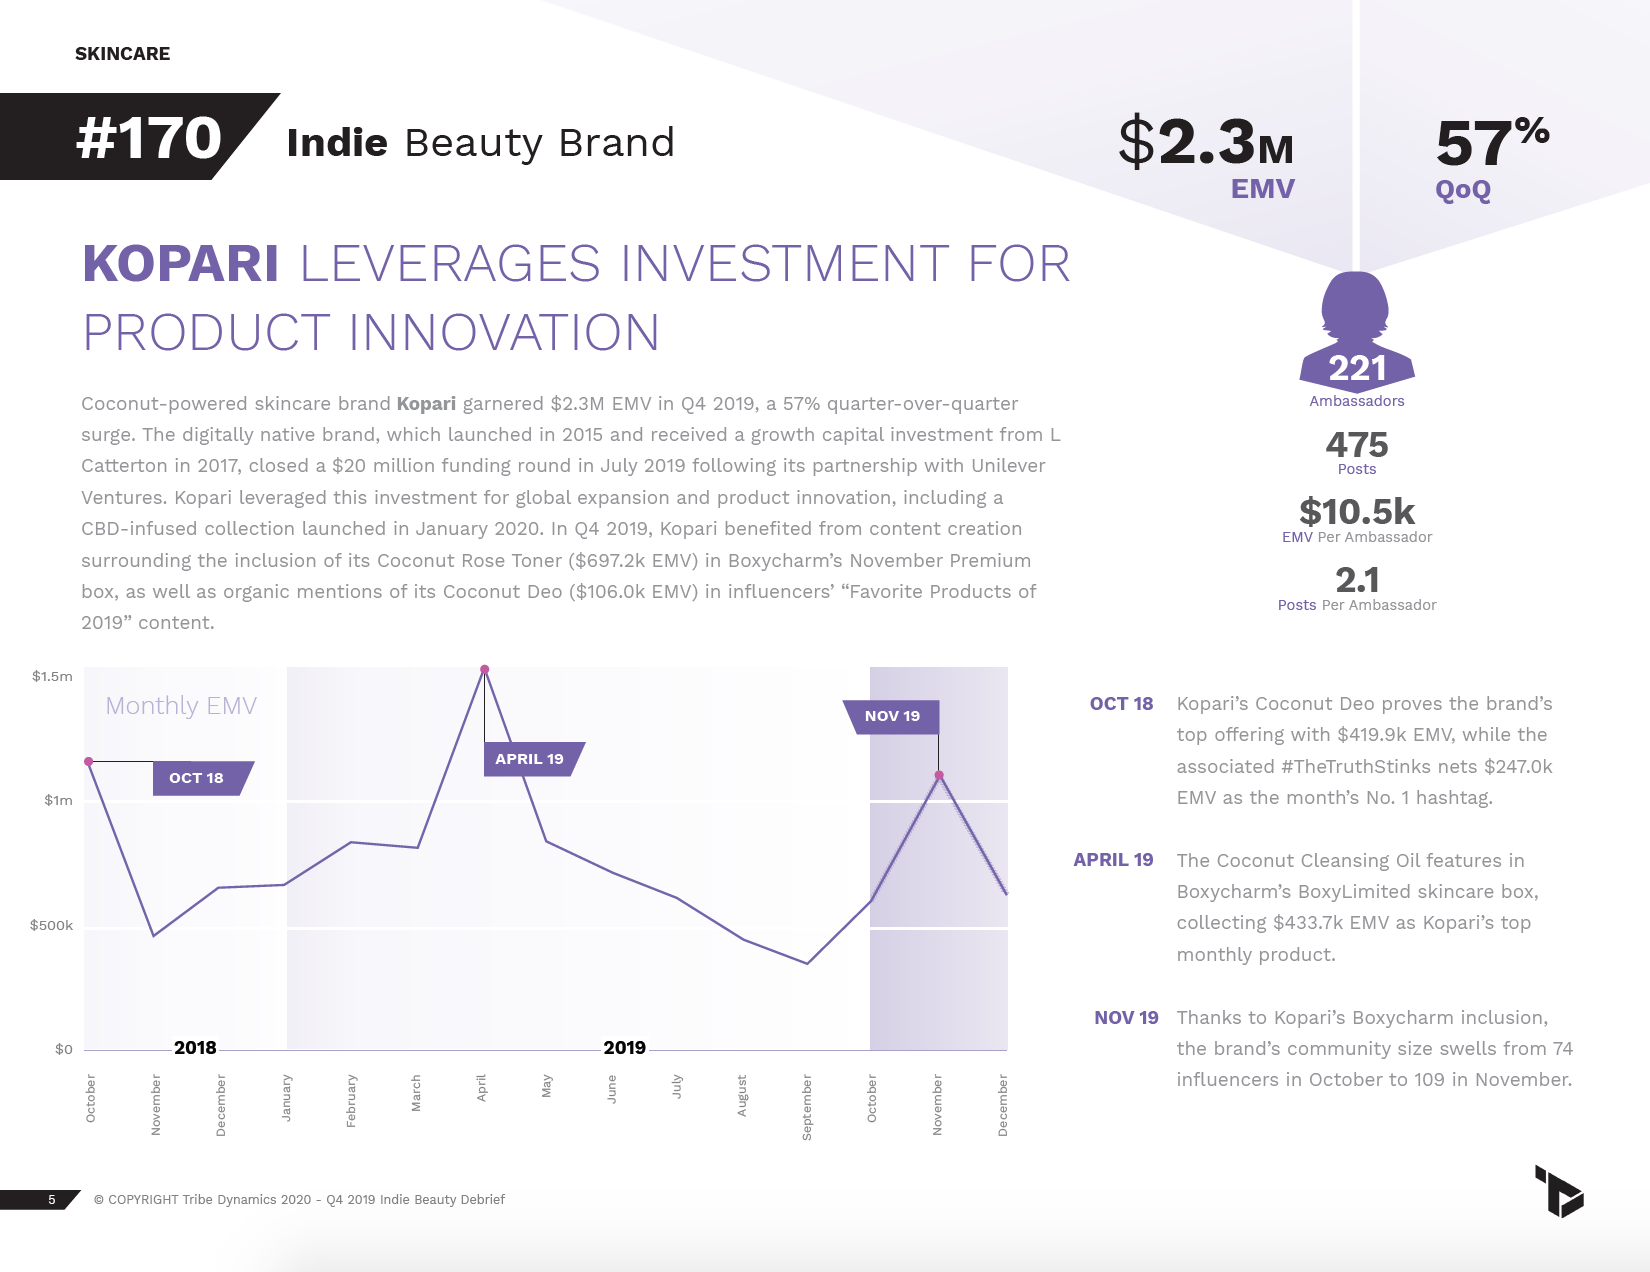 A page from Q4’s U.S. Indie Beauty Debrief, featuring Kopari's performance and influencer strategy.